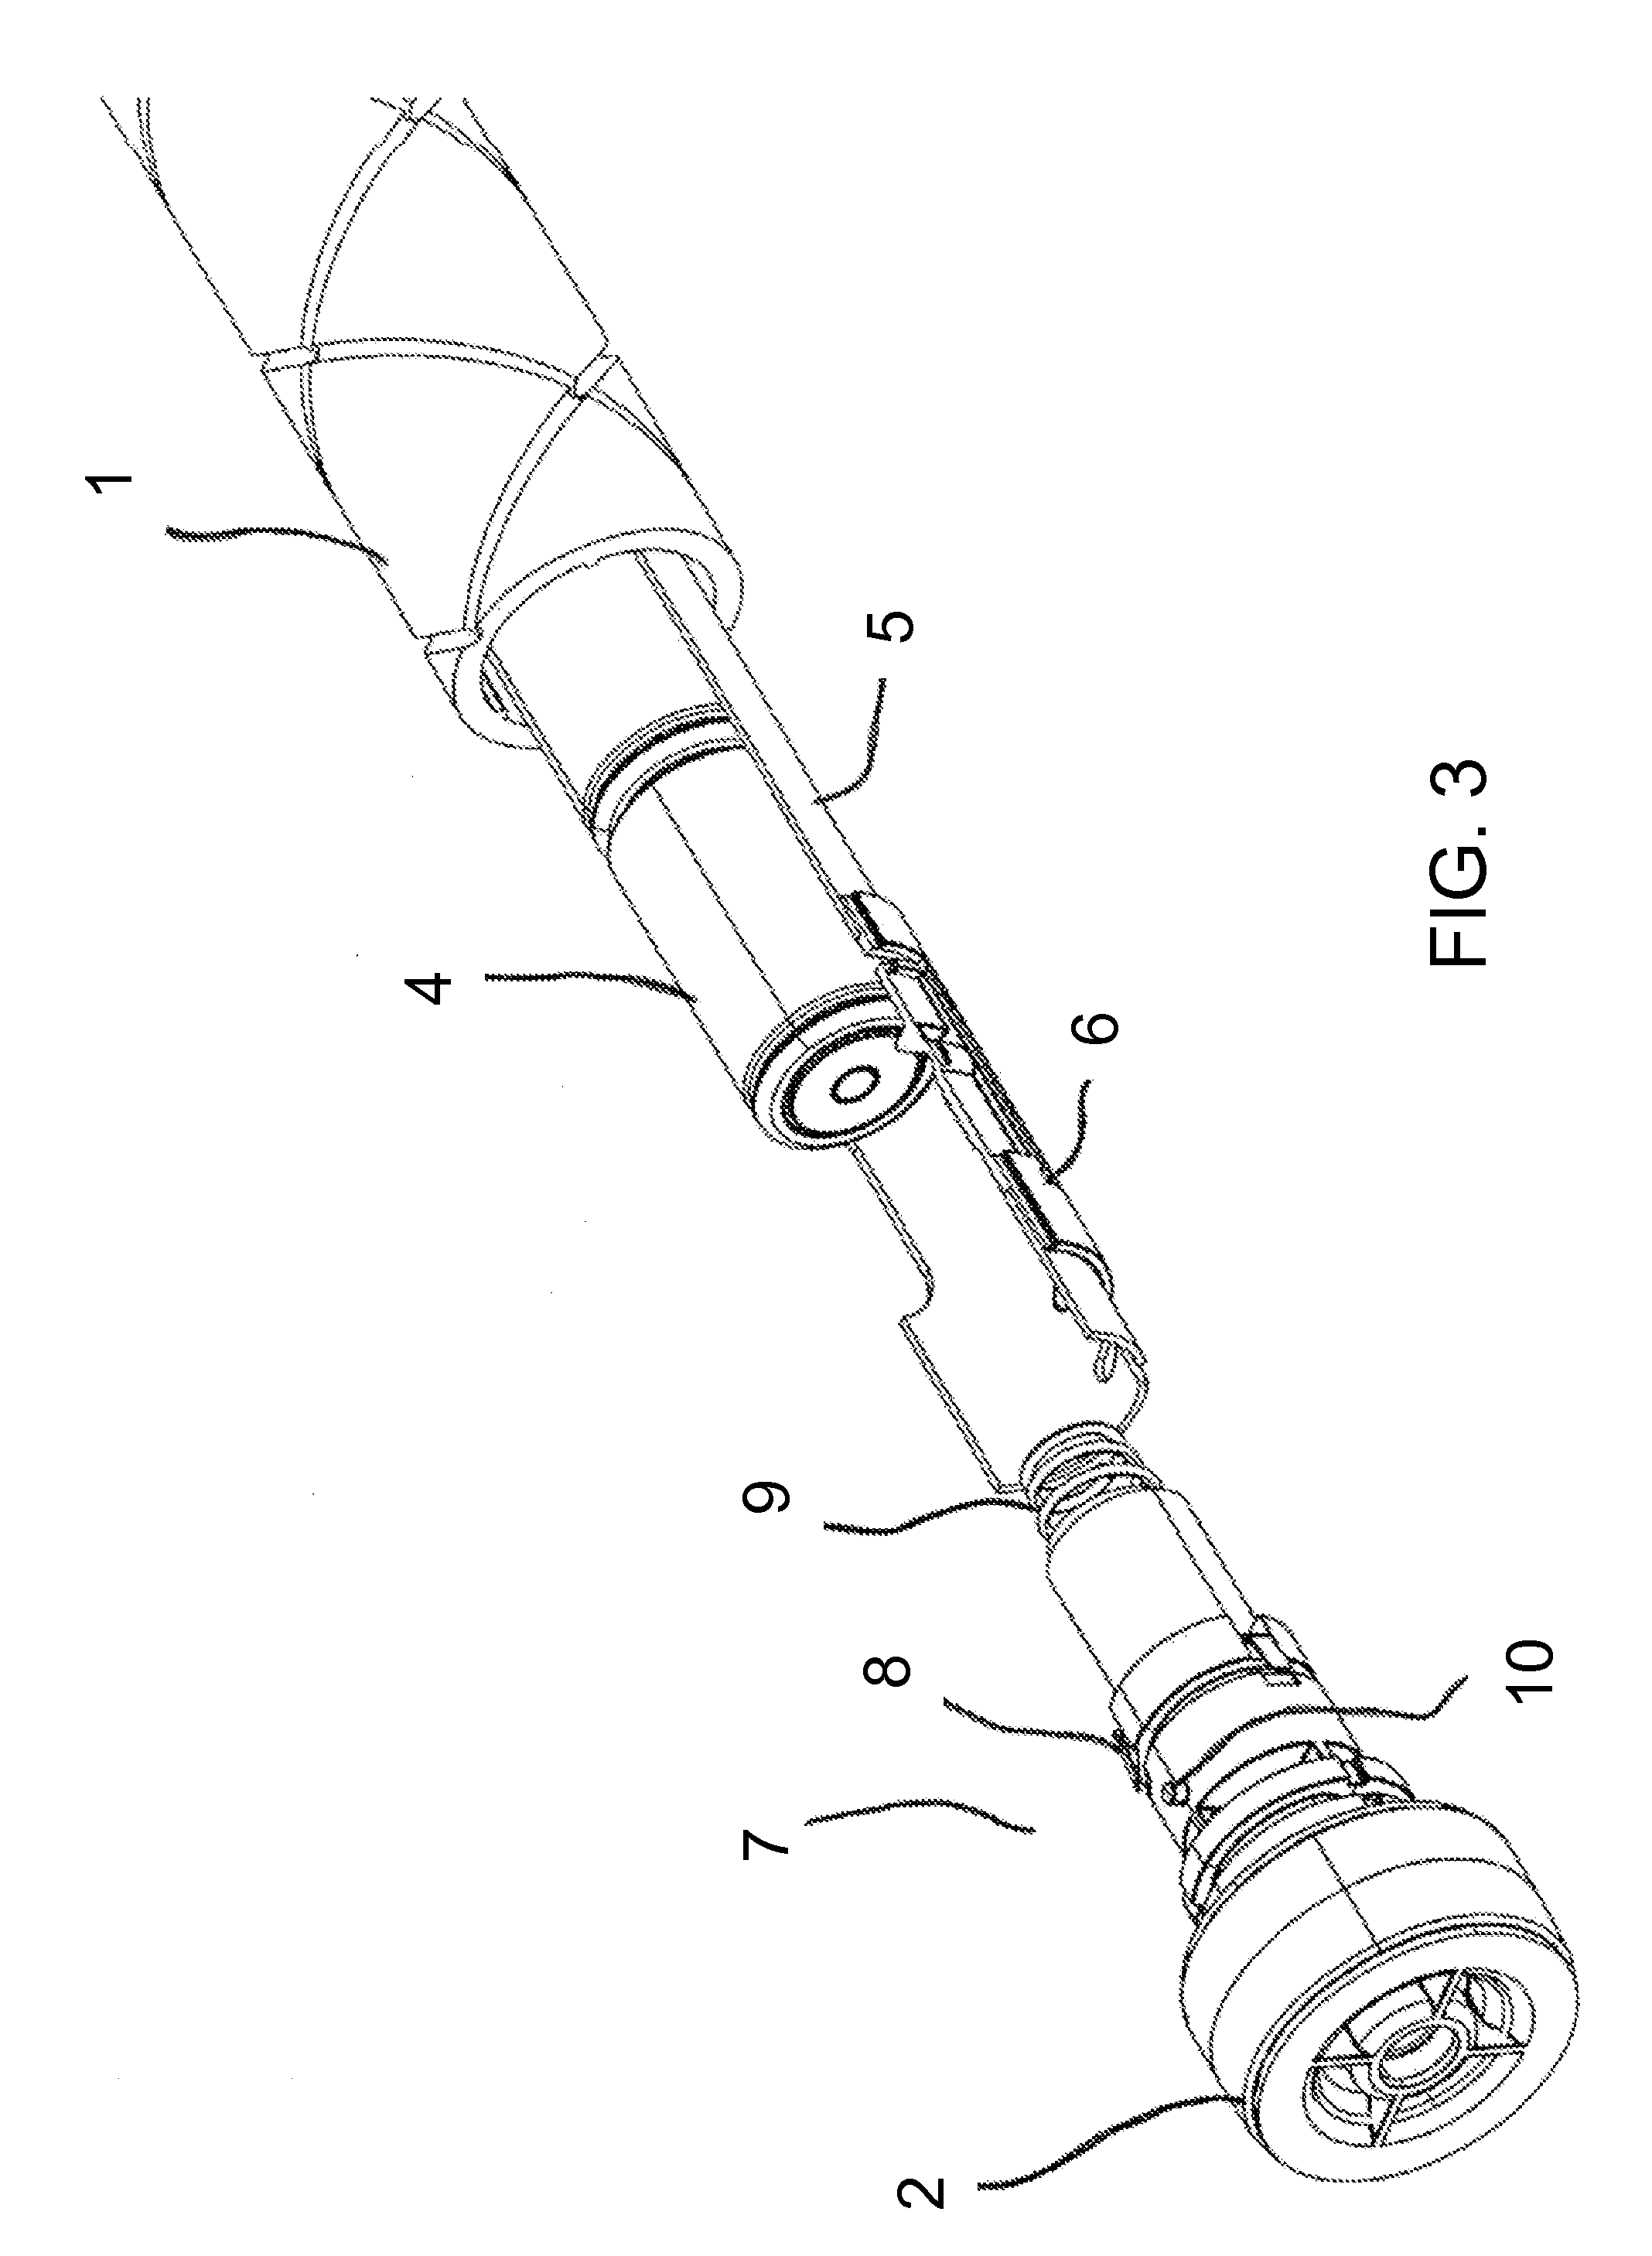 Drapery tube incorporating batteries within the drapery tube, with a stop for facilitating the loading and unloading of the batteries